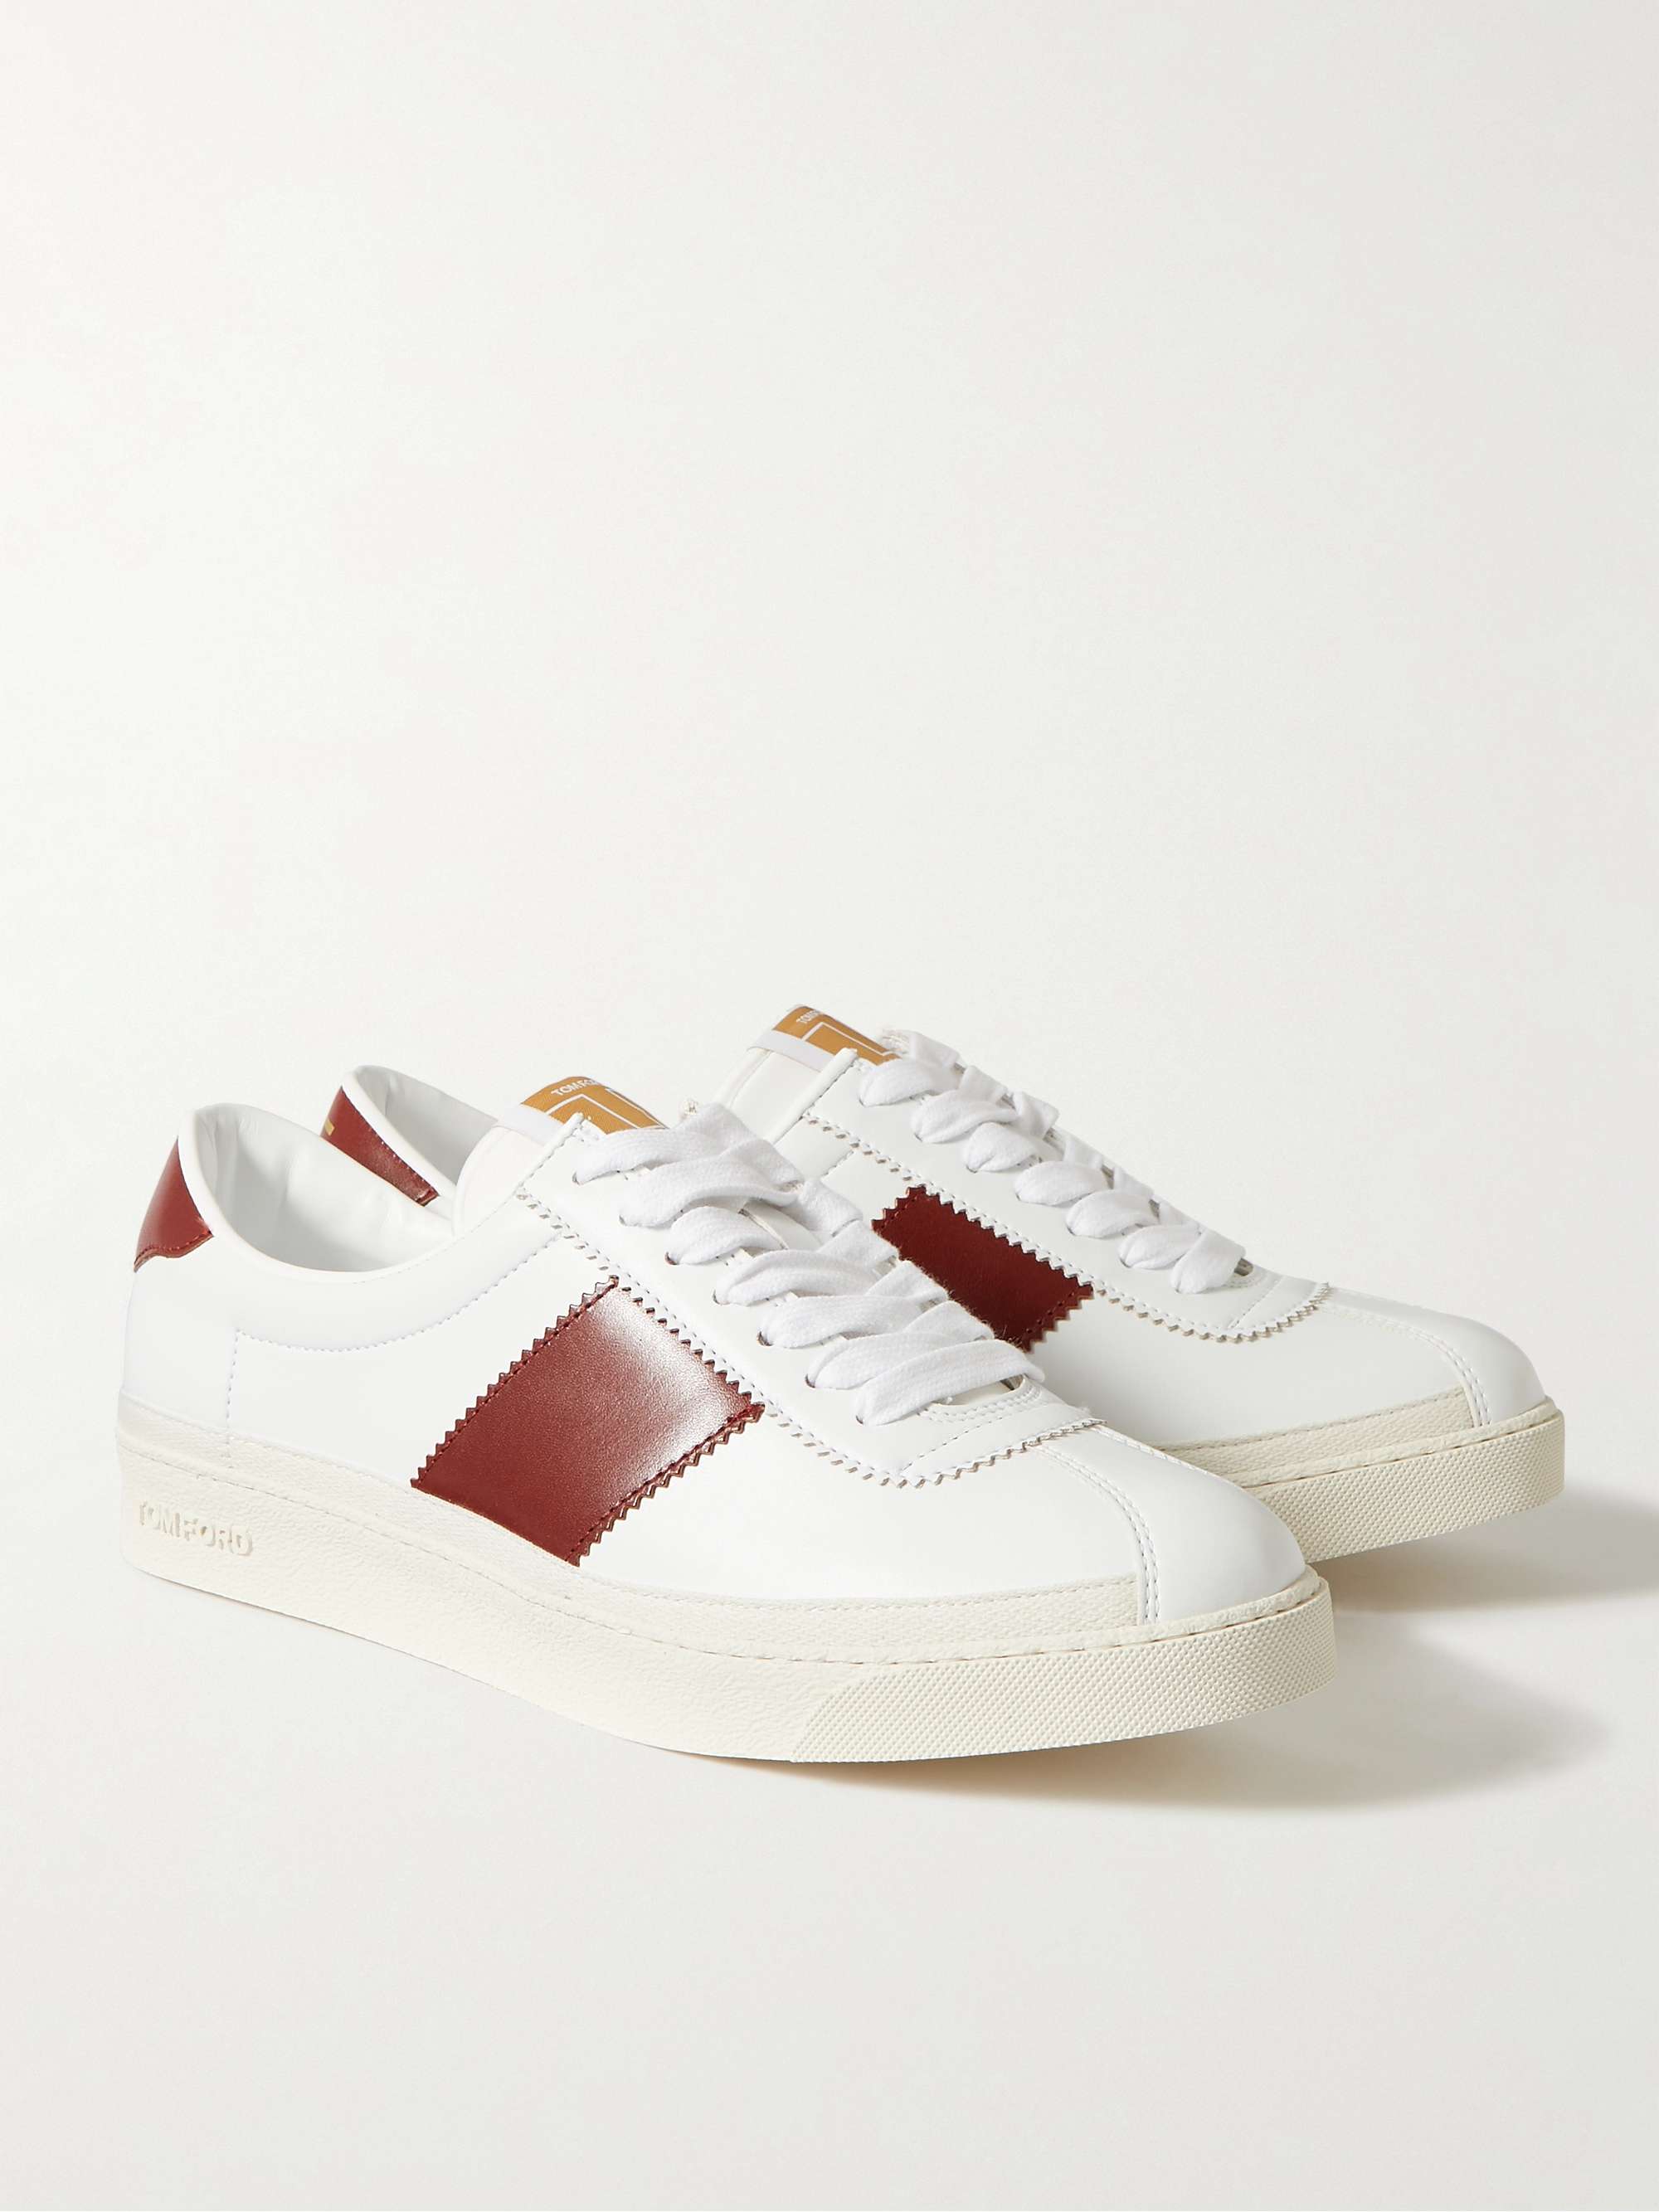 TOM FORD Bannister Panelled Faux Leather Sneakers